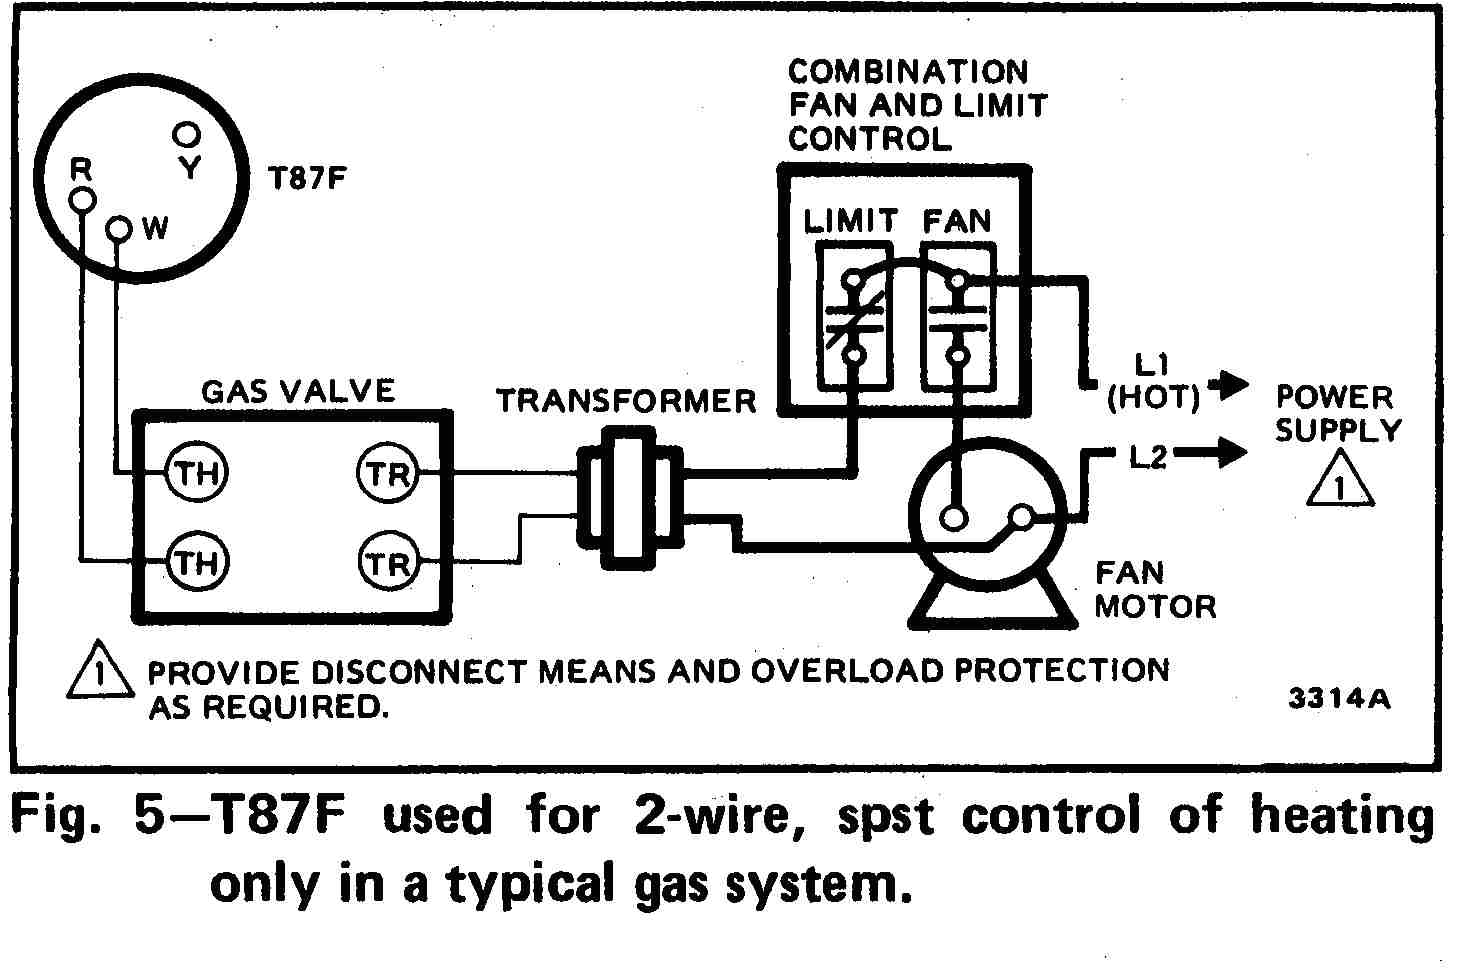 electric thermostat wiring diagram